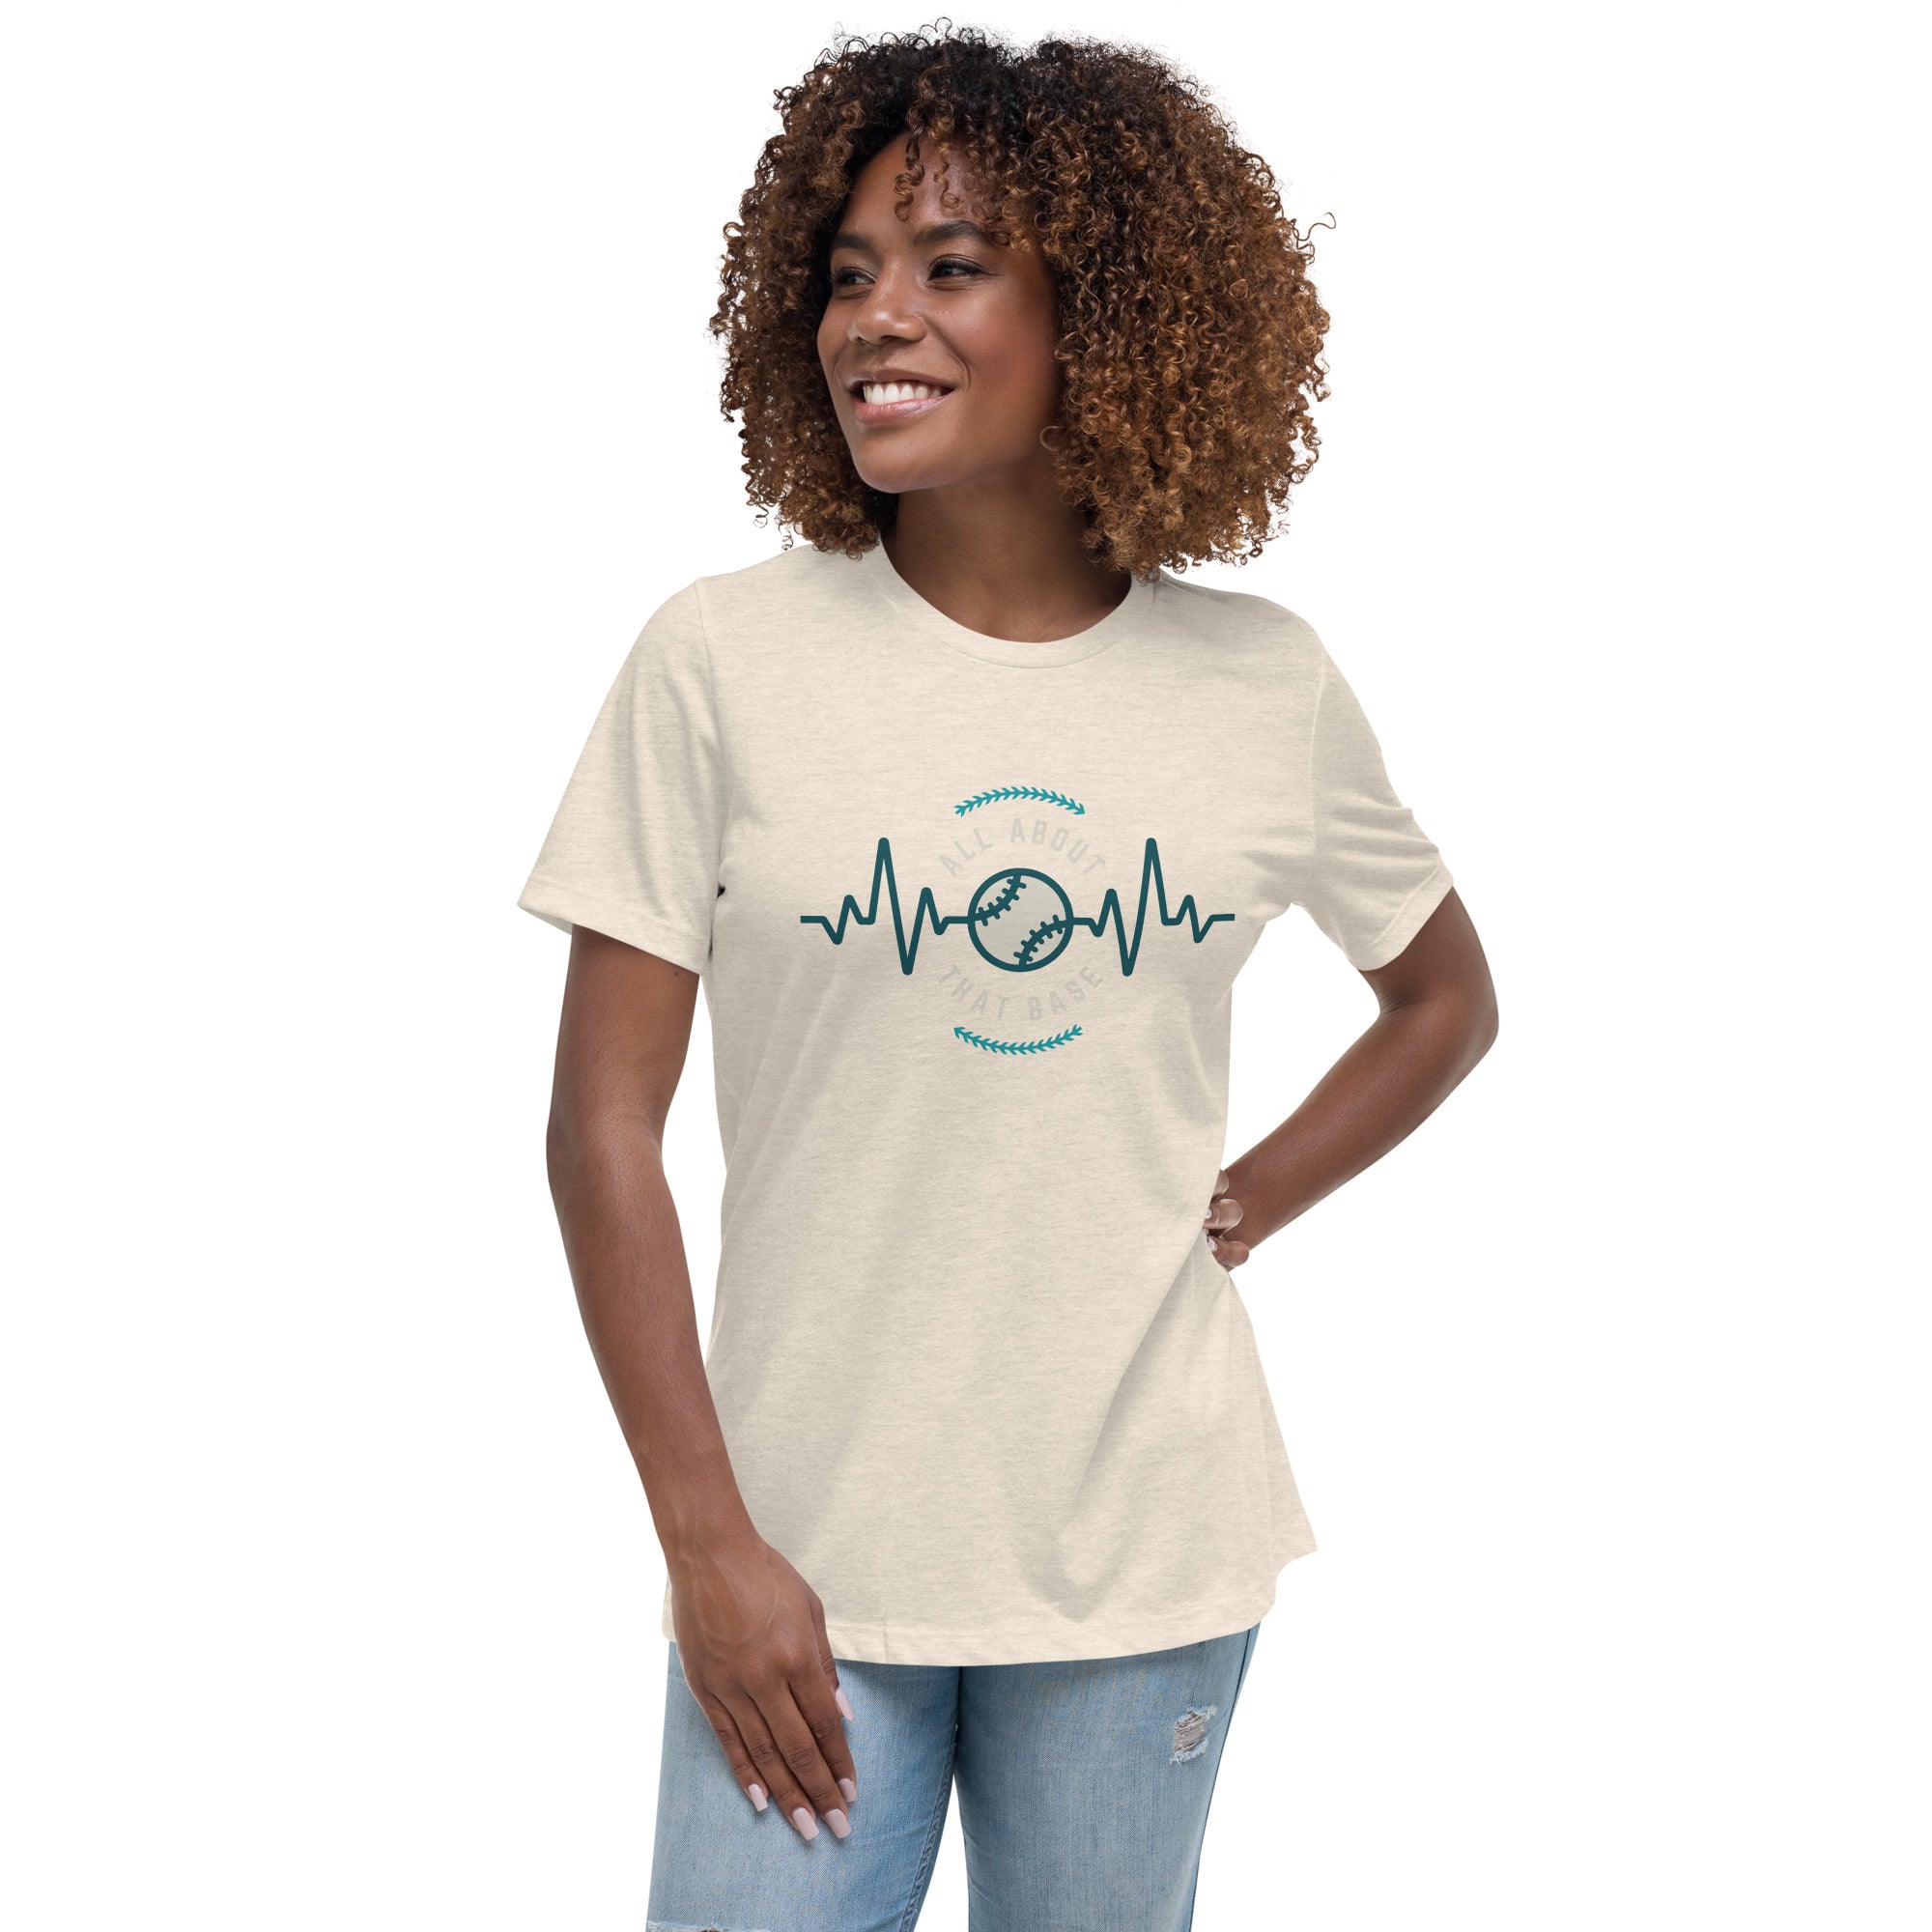 All About That Base Women's Premium T-Shirt